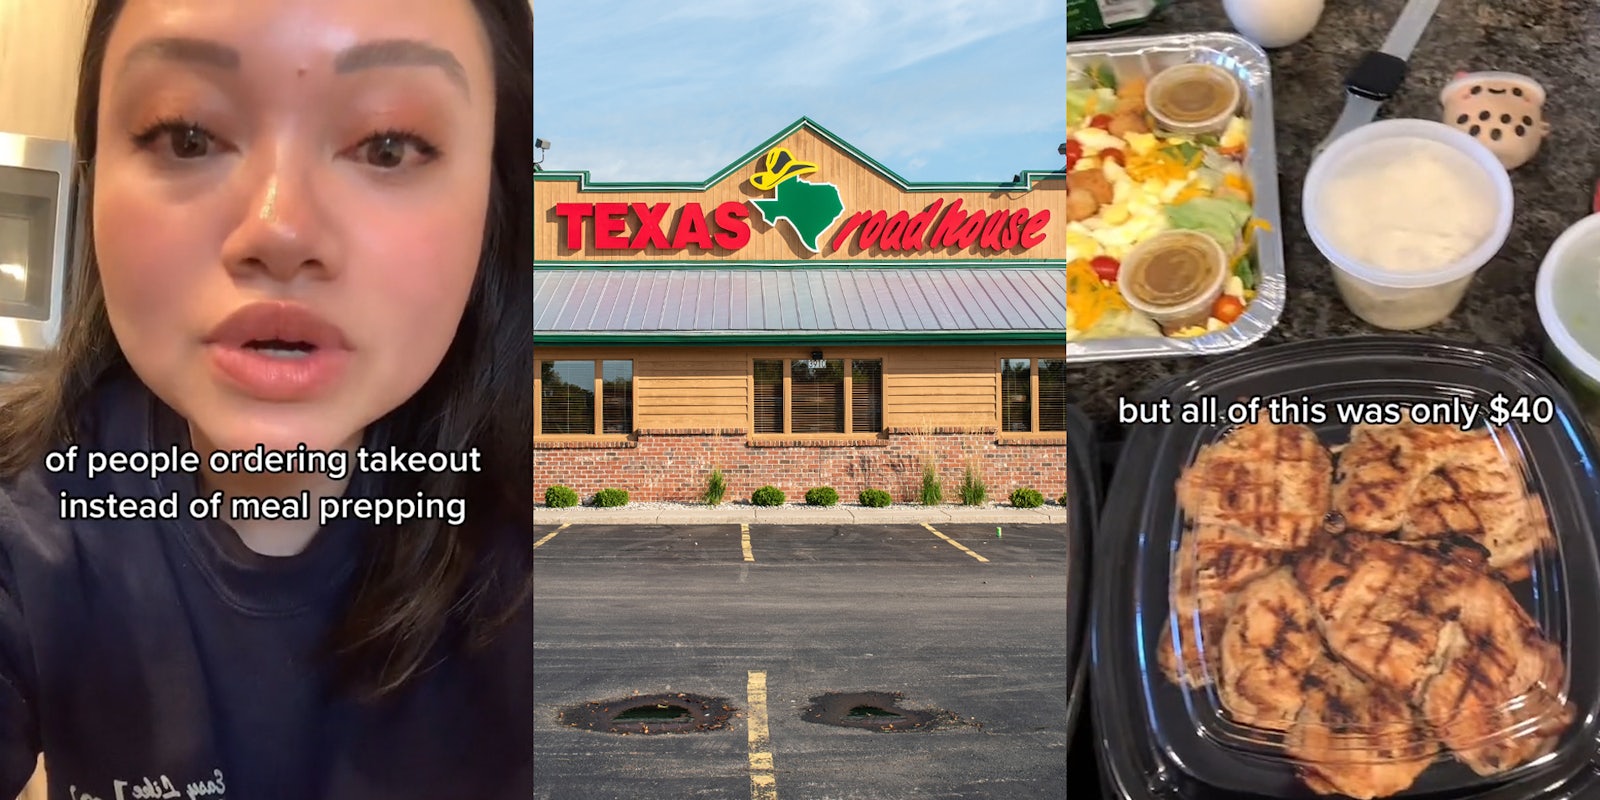 Texas Roadhouse customer speaking with caption 'of people ordering takeout instead of meal prepping' (l) Texas Roadhouse building with parking lot sign and blue sky (c) Texas Roadhouse food on counter with caption 'but all of this was only $40' (r)